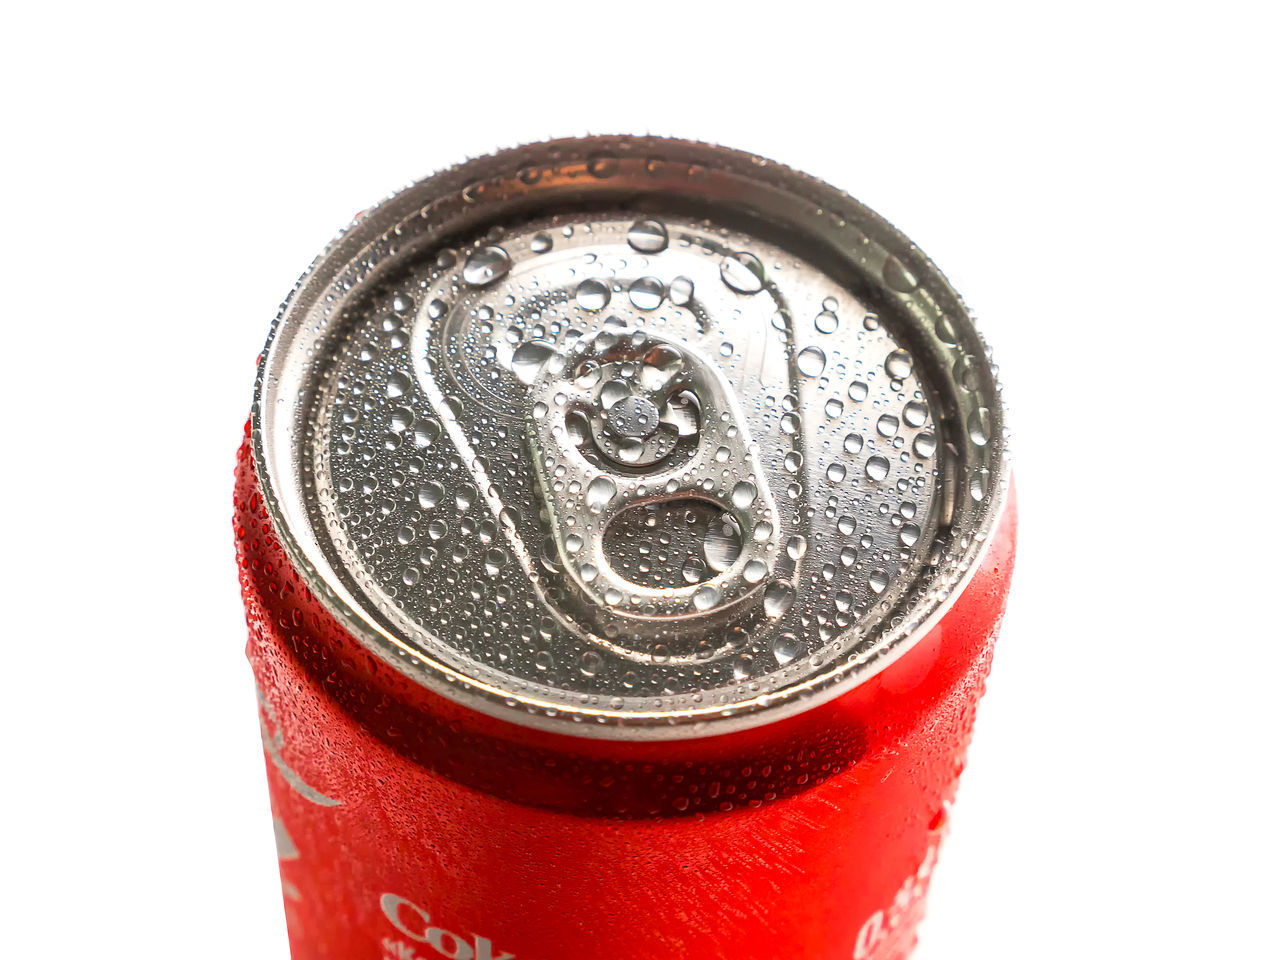 soft drink, drink can, drink, refreshment, can, aluminum can, soda, food and drink, cola, beer, alcohol, white background, metal, cut out, red, cold temperature, aluminum, cold drink, single object, tin can, close-up, studio shot, container, food, no people, indoors